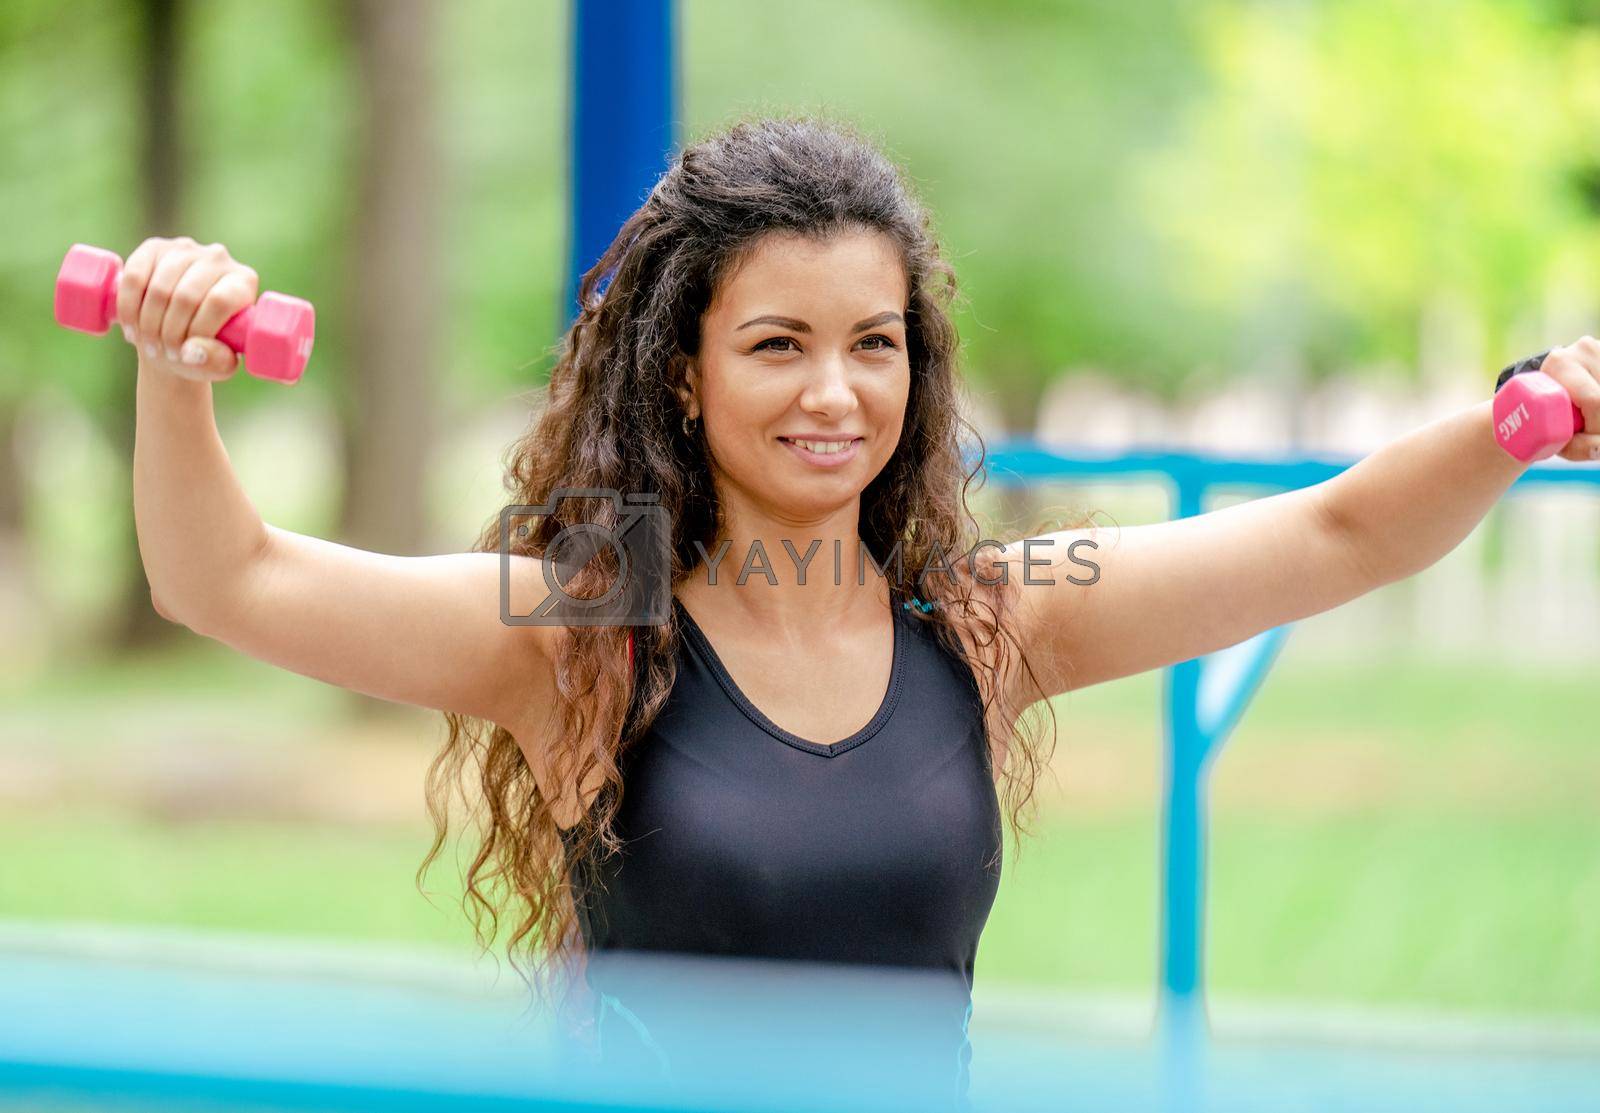 Pretty girl with dumbbells doing arm workout outdoors. Young woman exercising with sport fitness equipment at stadium